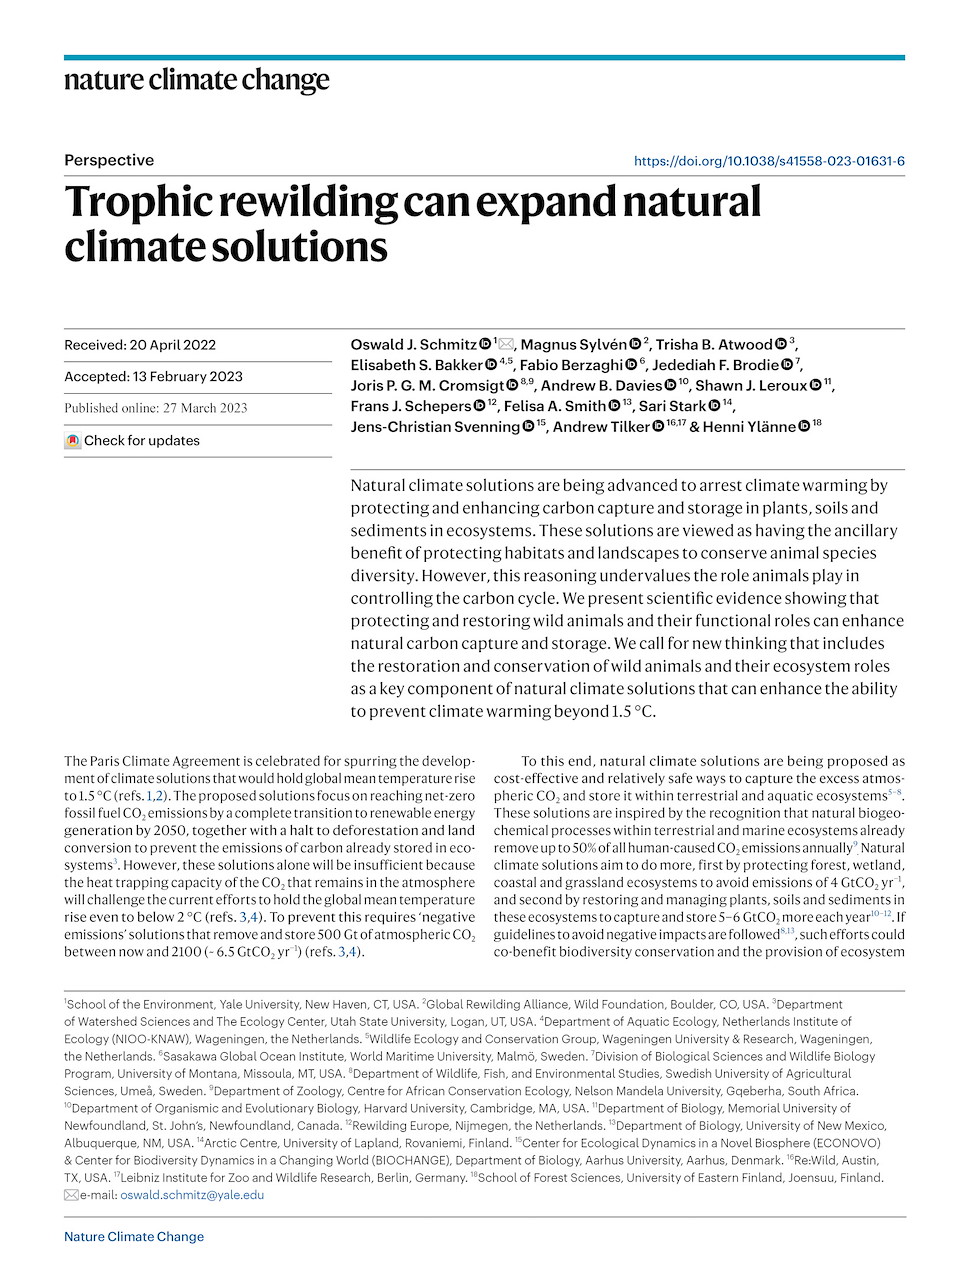 Trophic rewilding can expand natural climate solutions (PDF)